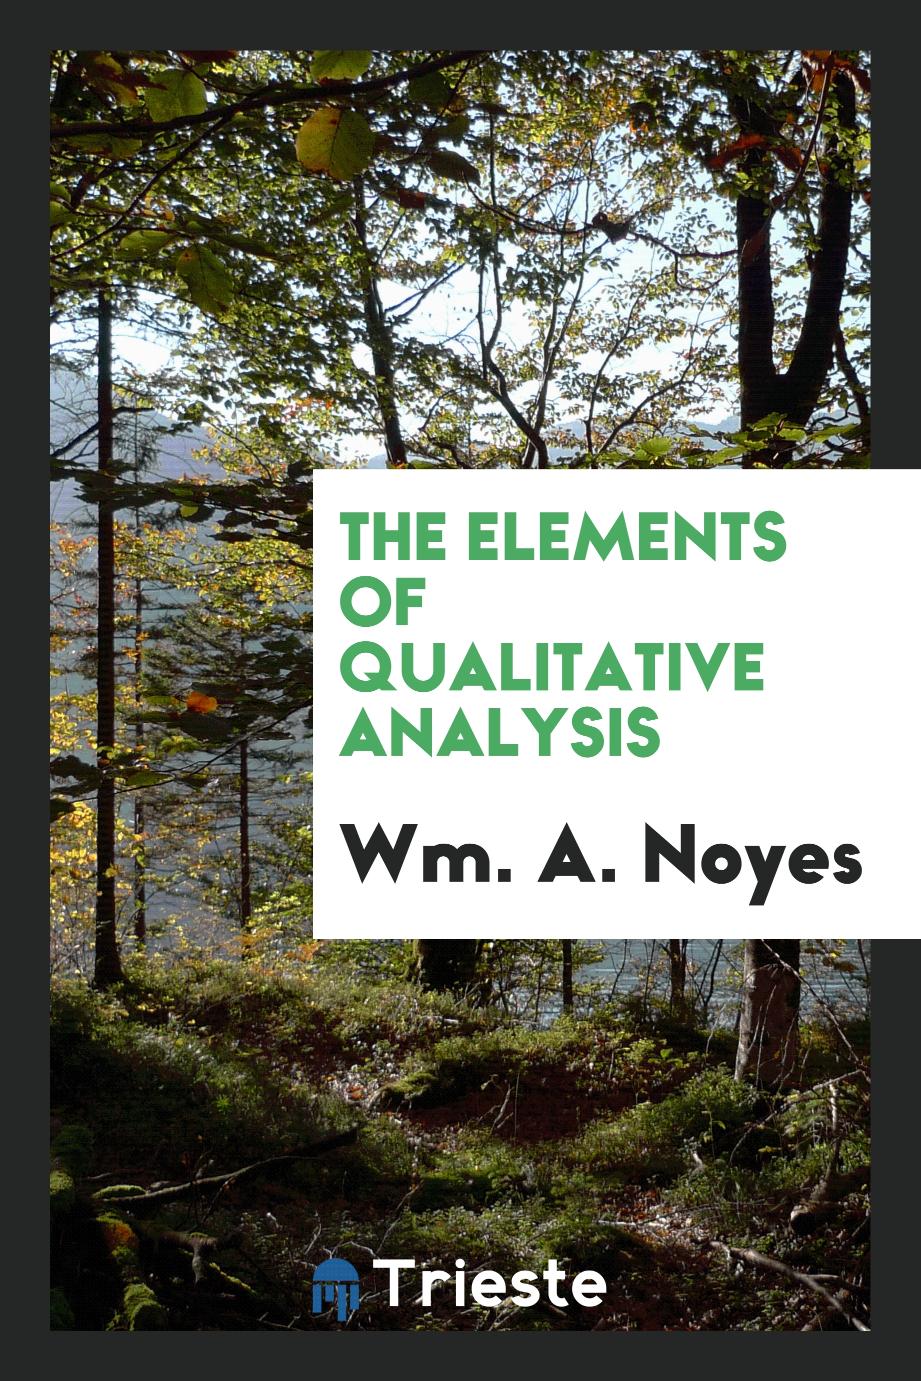 The Elements of Qualitative Analysis